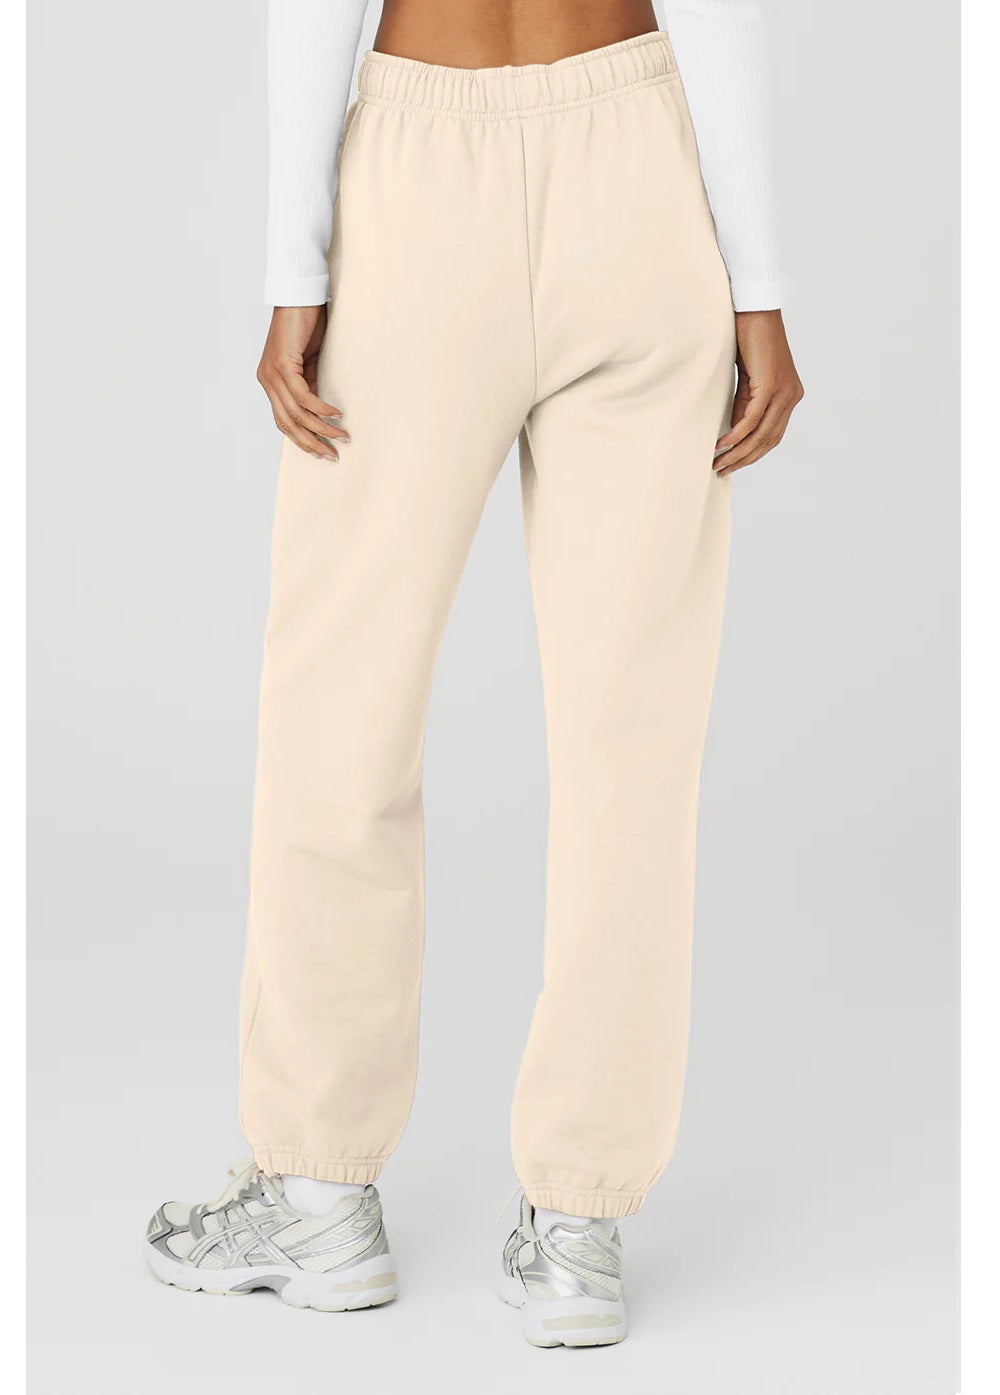 ACCOLADE SWEATPANT — Santa Fe Trail Outfitters